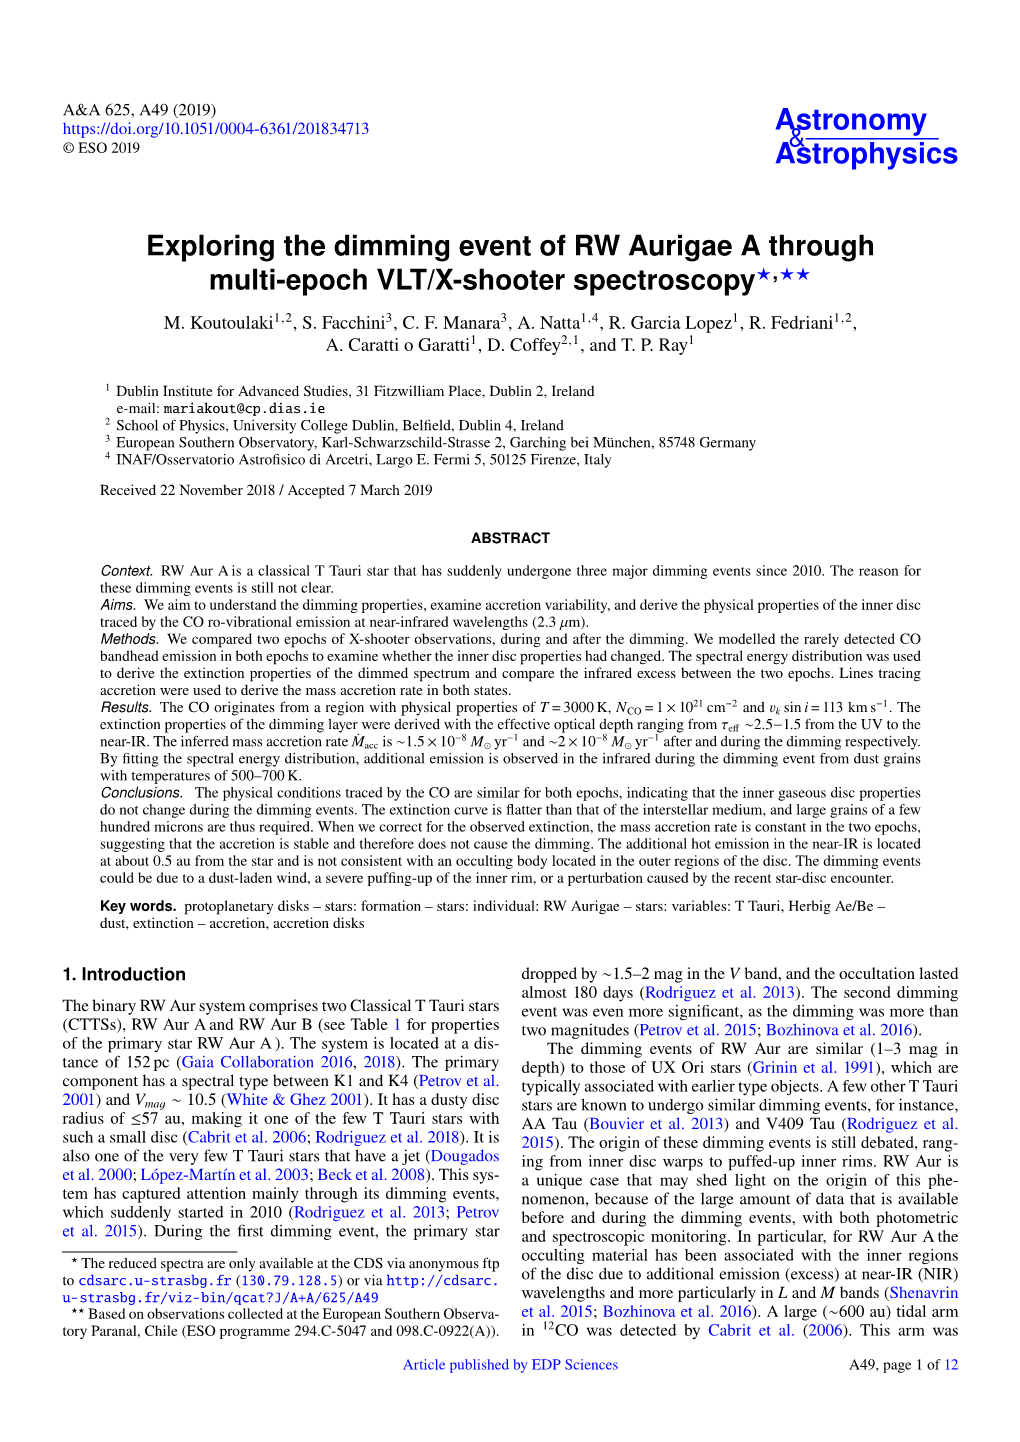 Exploring the Dimming Event of RW Aurigae a Through Multi-Epoch VLT/X-Shooter Spectroscopy?,?? M